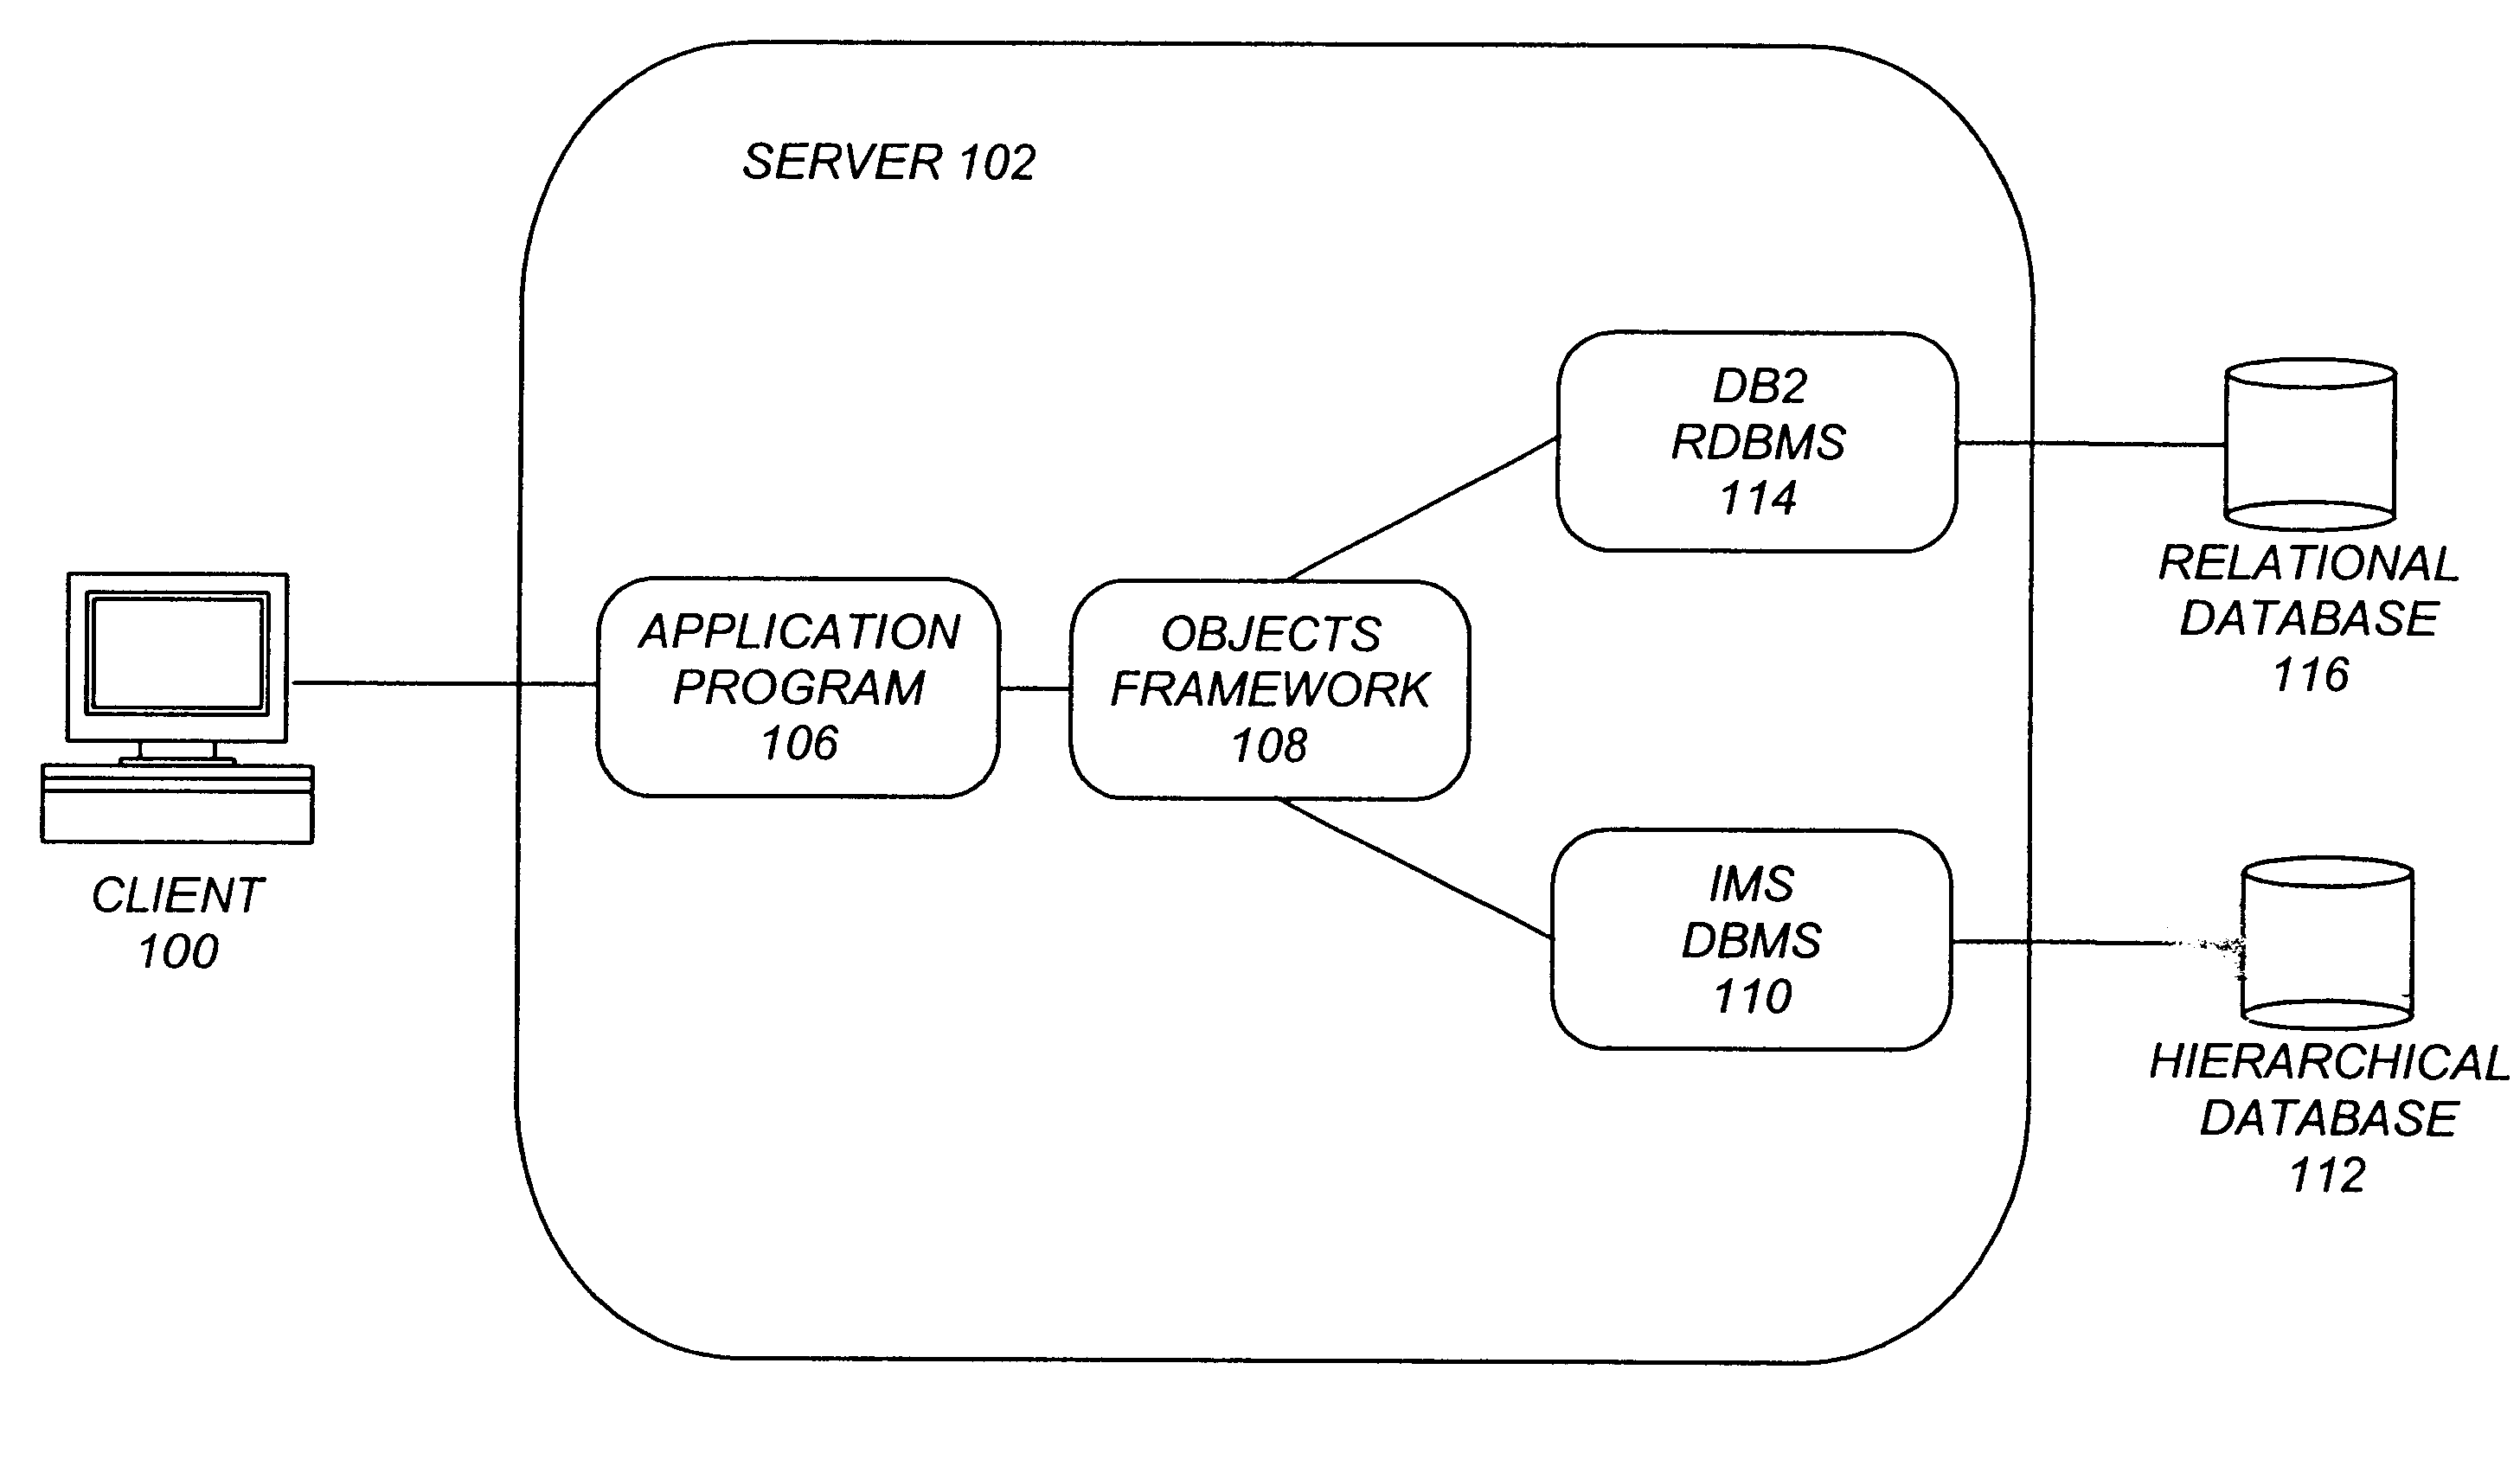 Object-oriented programming model for accessing both relational and hierarchical databases from an objects framework